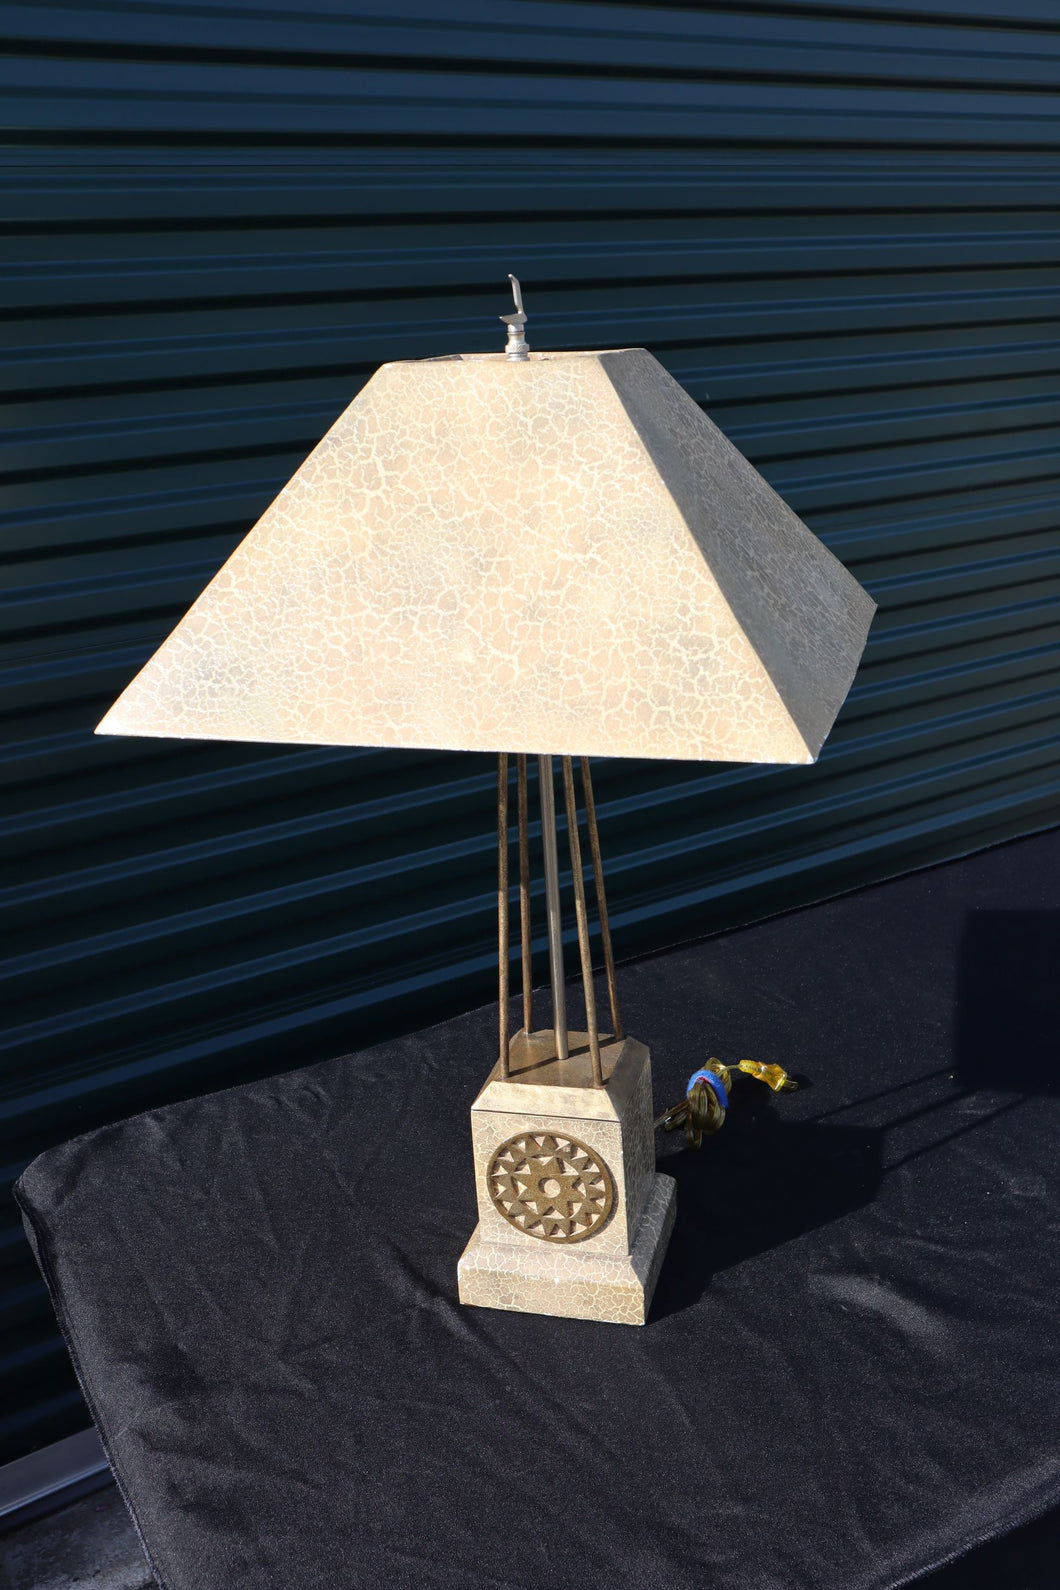 Patterned Lamp with Gear Dial